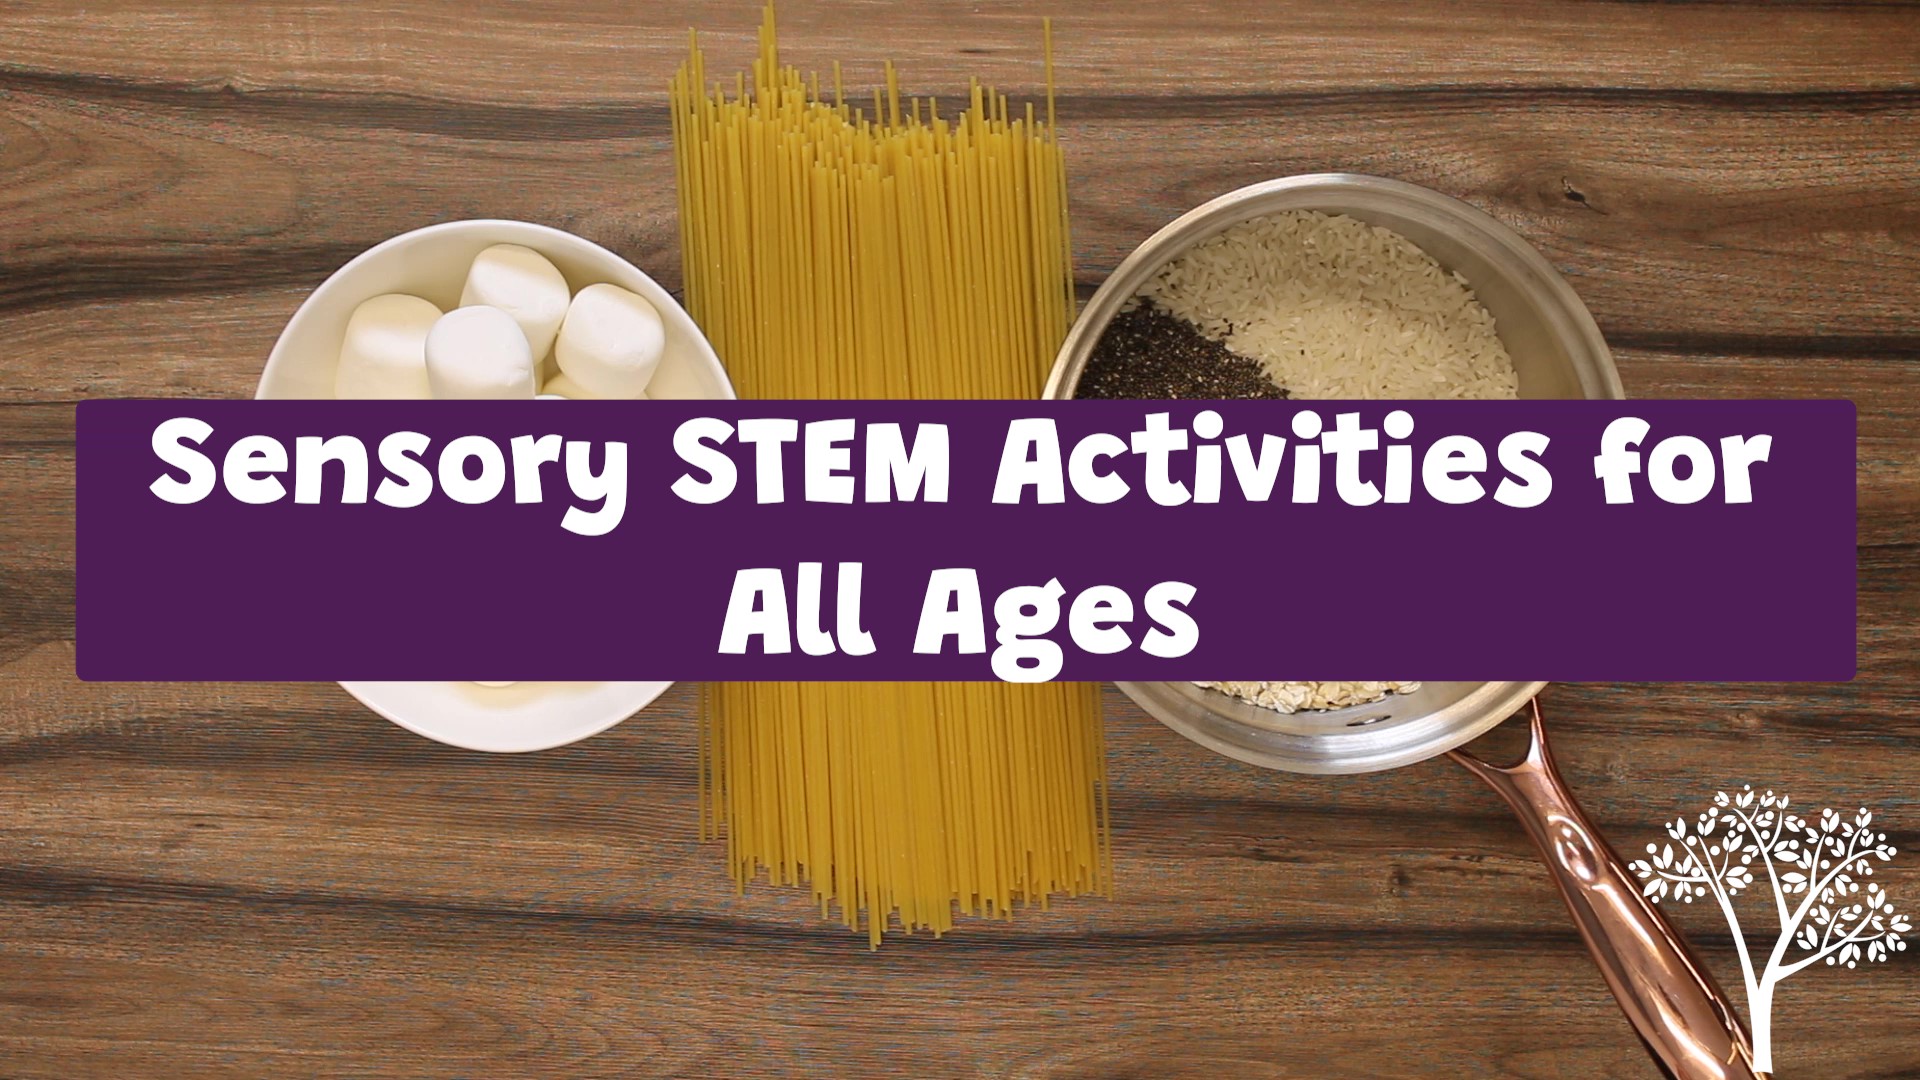 Sensory STEM activities for all ages draft1 Moment